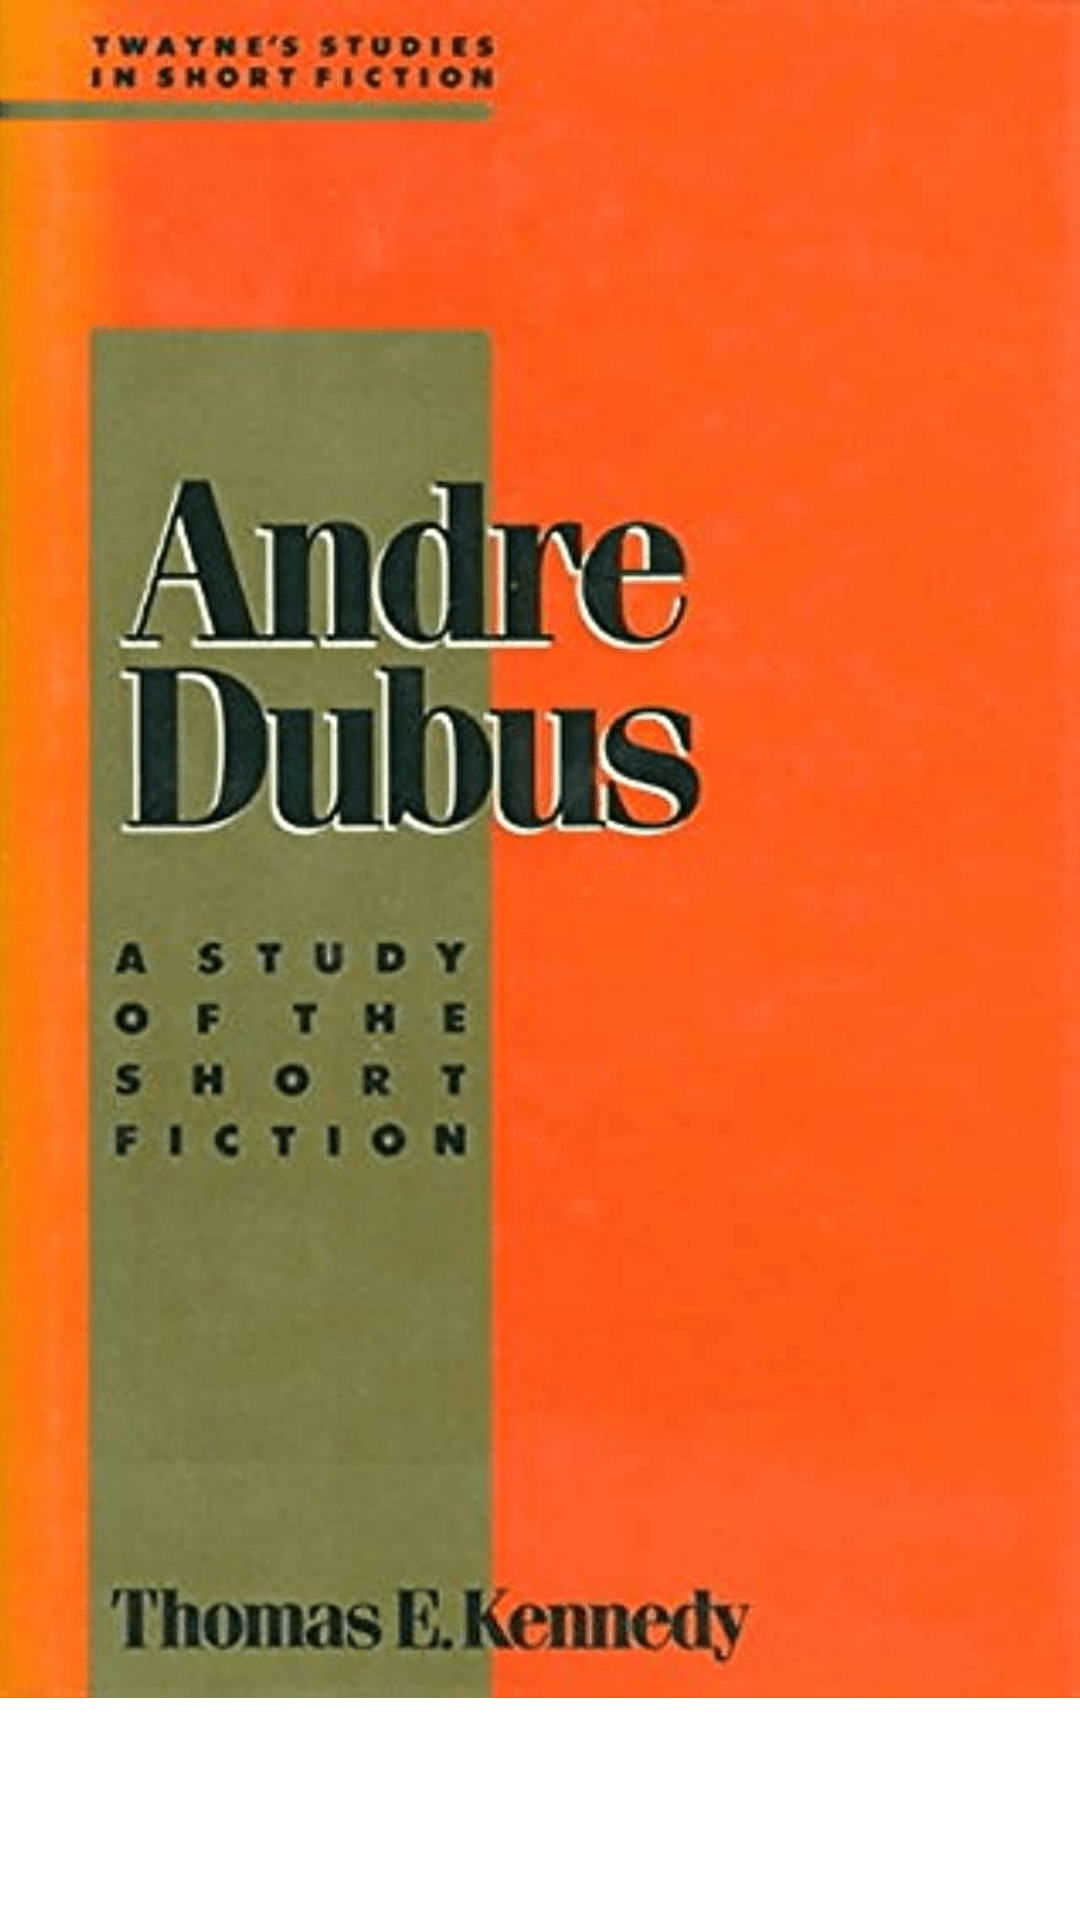 Andre Dubus: A Study of the Short Fiction (Twayne's Studies in Short Fiction)